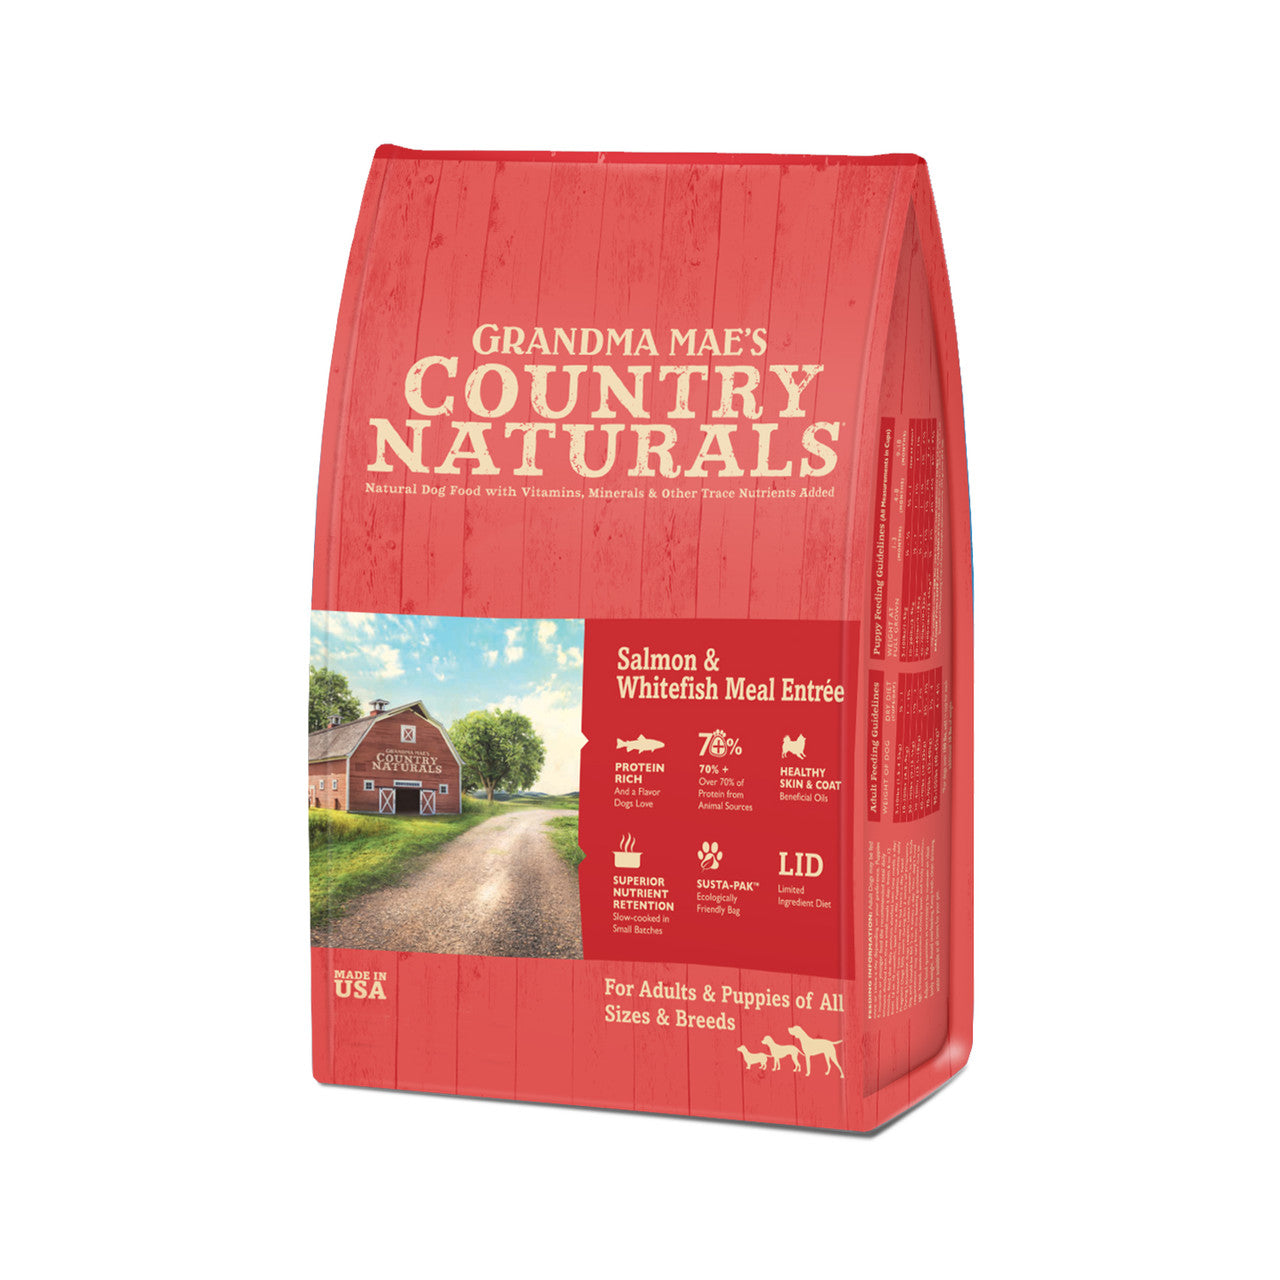 Grandma Mae's Country Naturals Dry Dog Food Salmon & Whitefish Meal 14lb